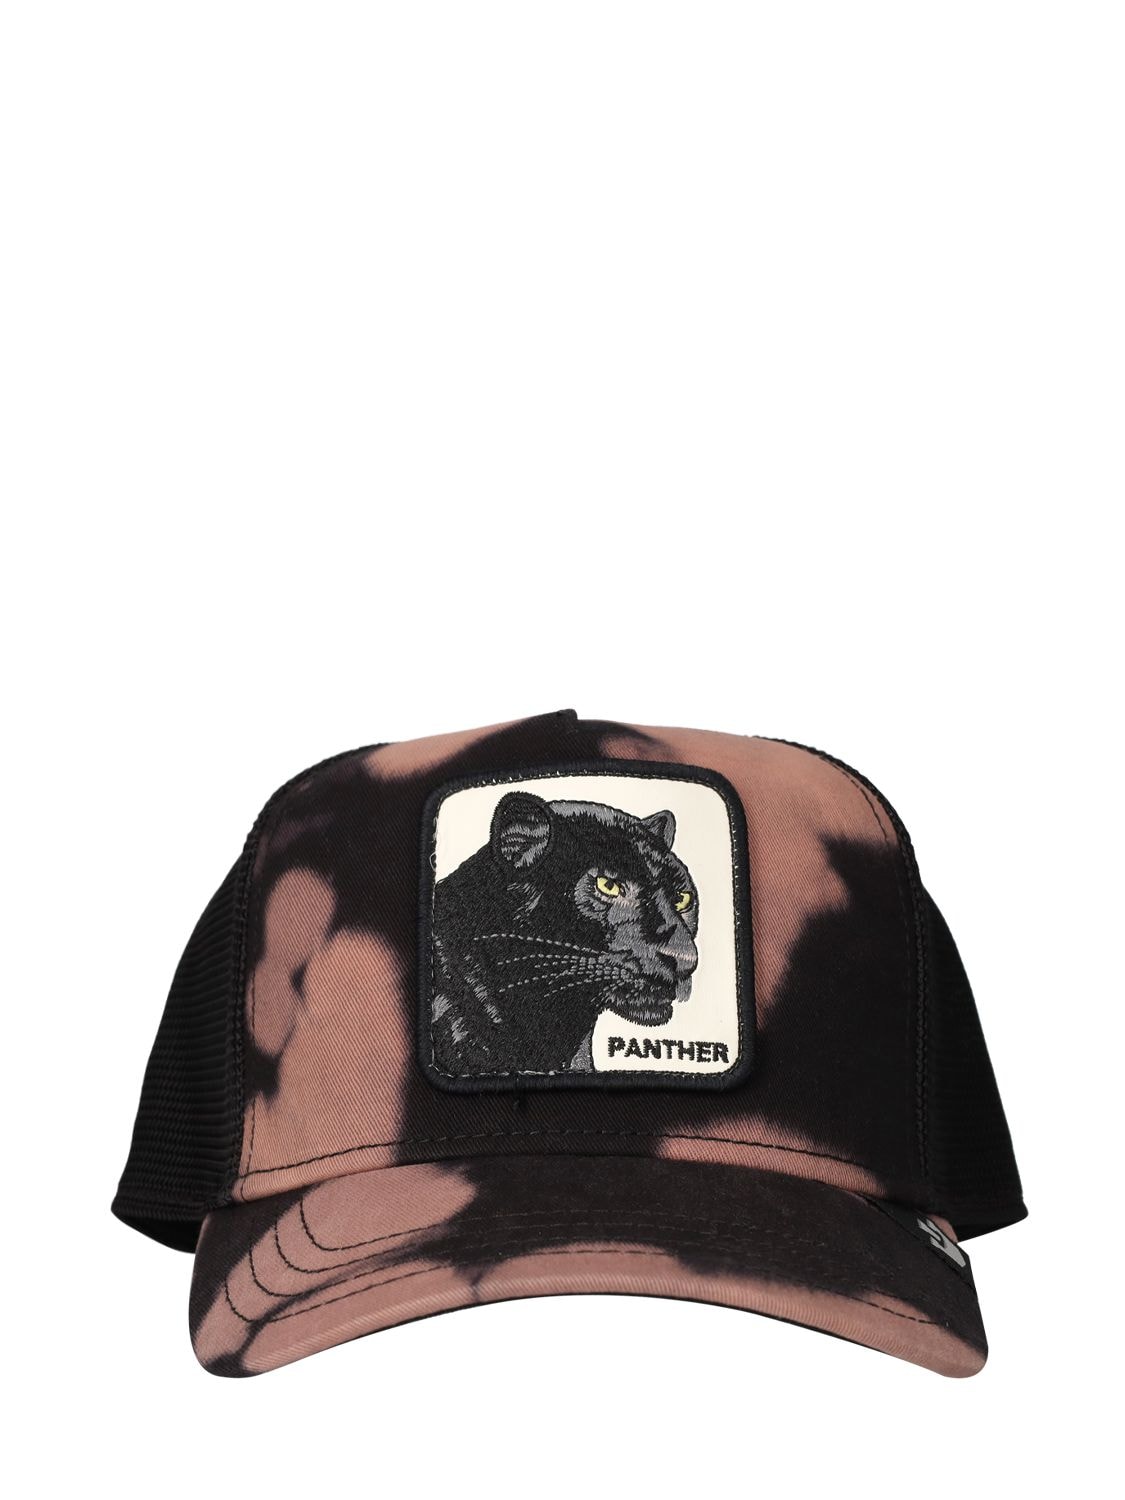 Image of Acid Panther Trucker Hat W/ Patch